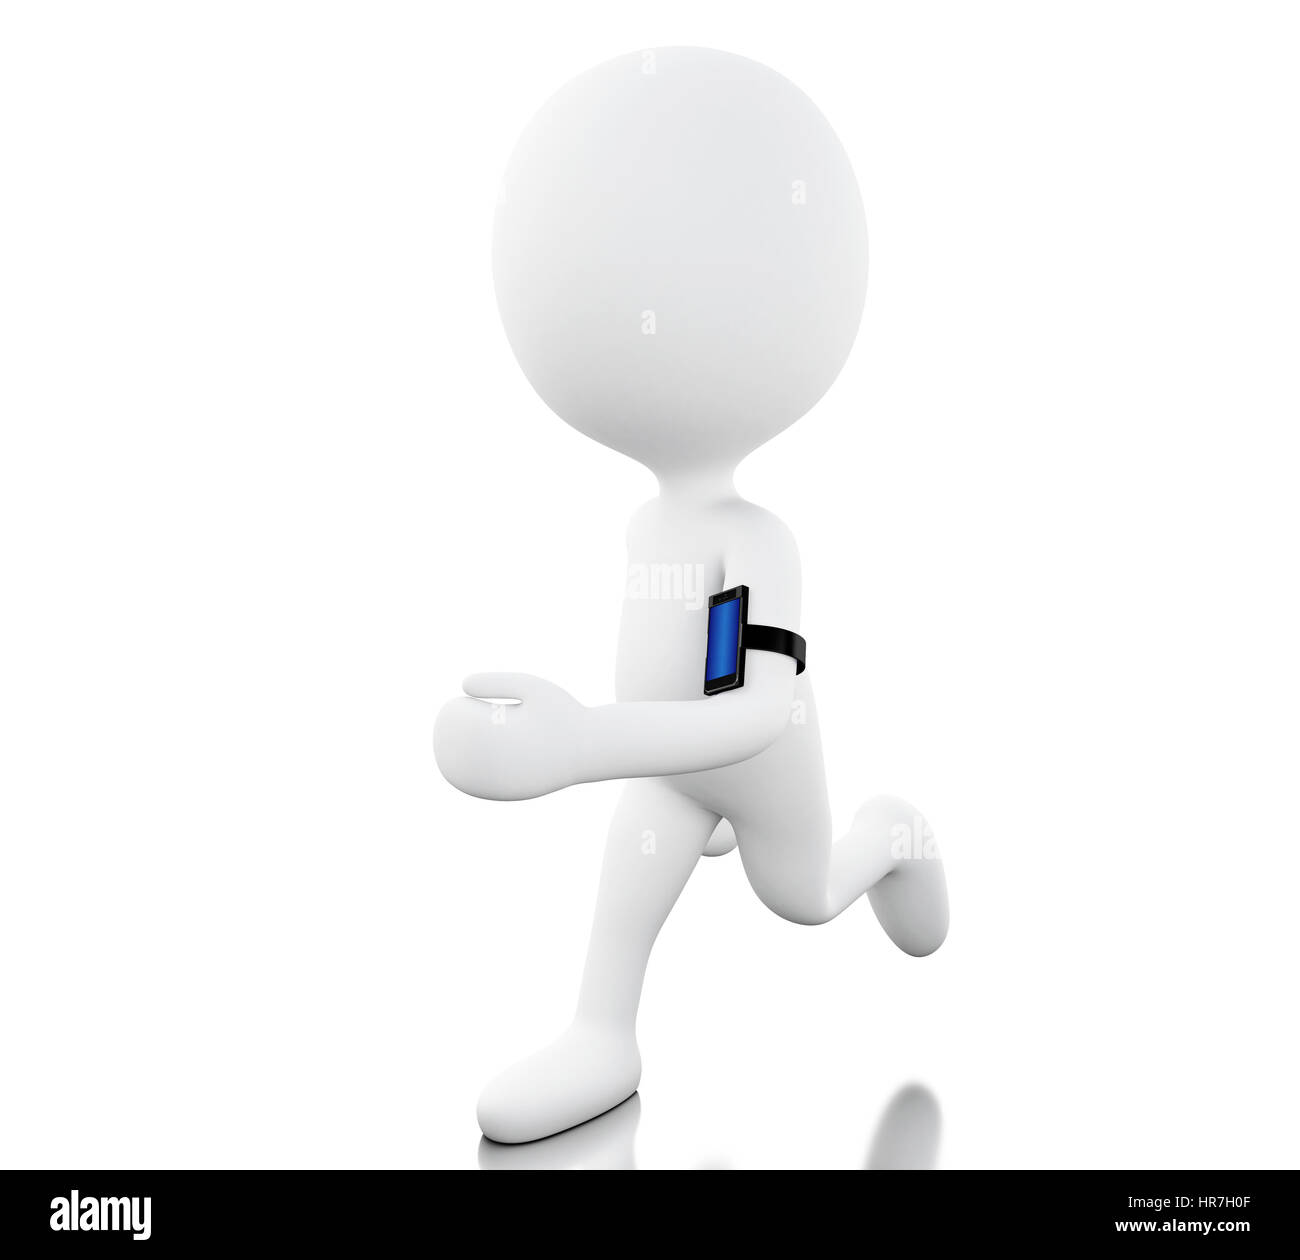 3d render illustration. White person running with a mobile phone. Sport and technology concept. Isolated white background Stock Photo